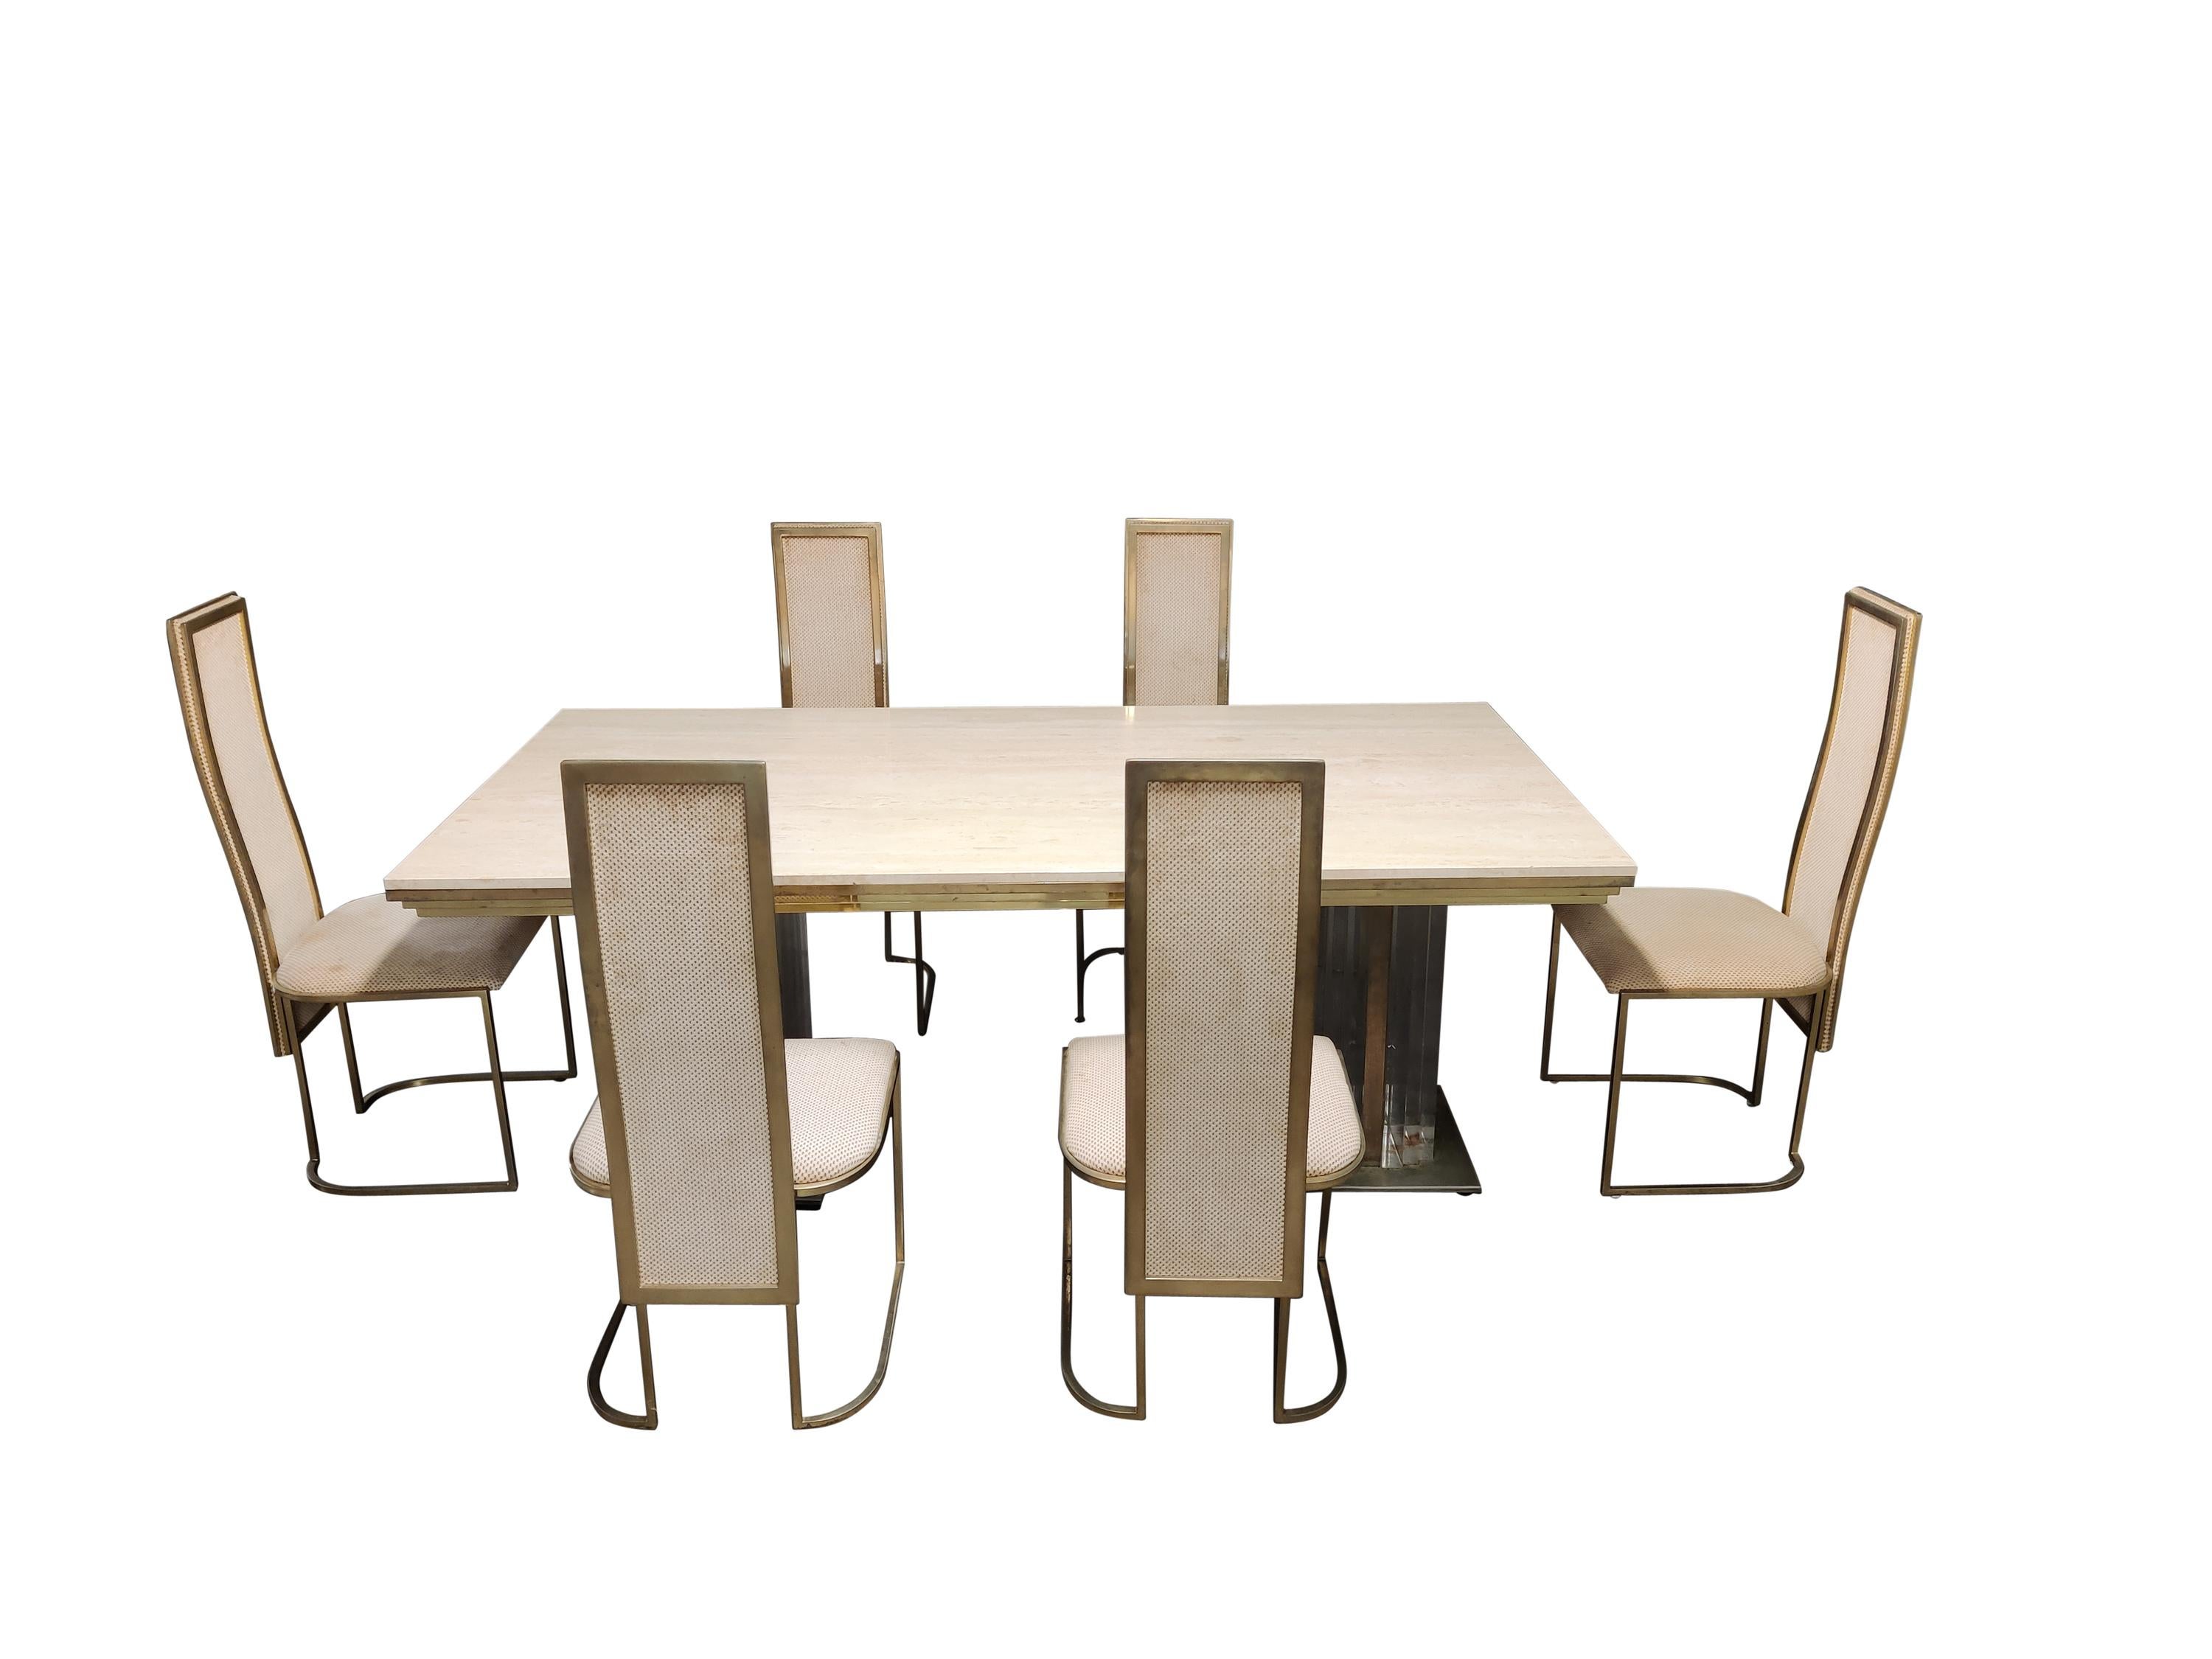 Belgian Vintage Lucite, Brass and Travertine Dining Table, 1970s For Sale